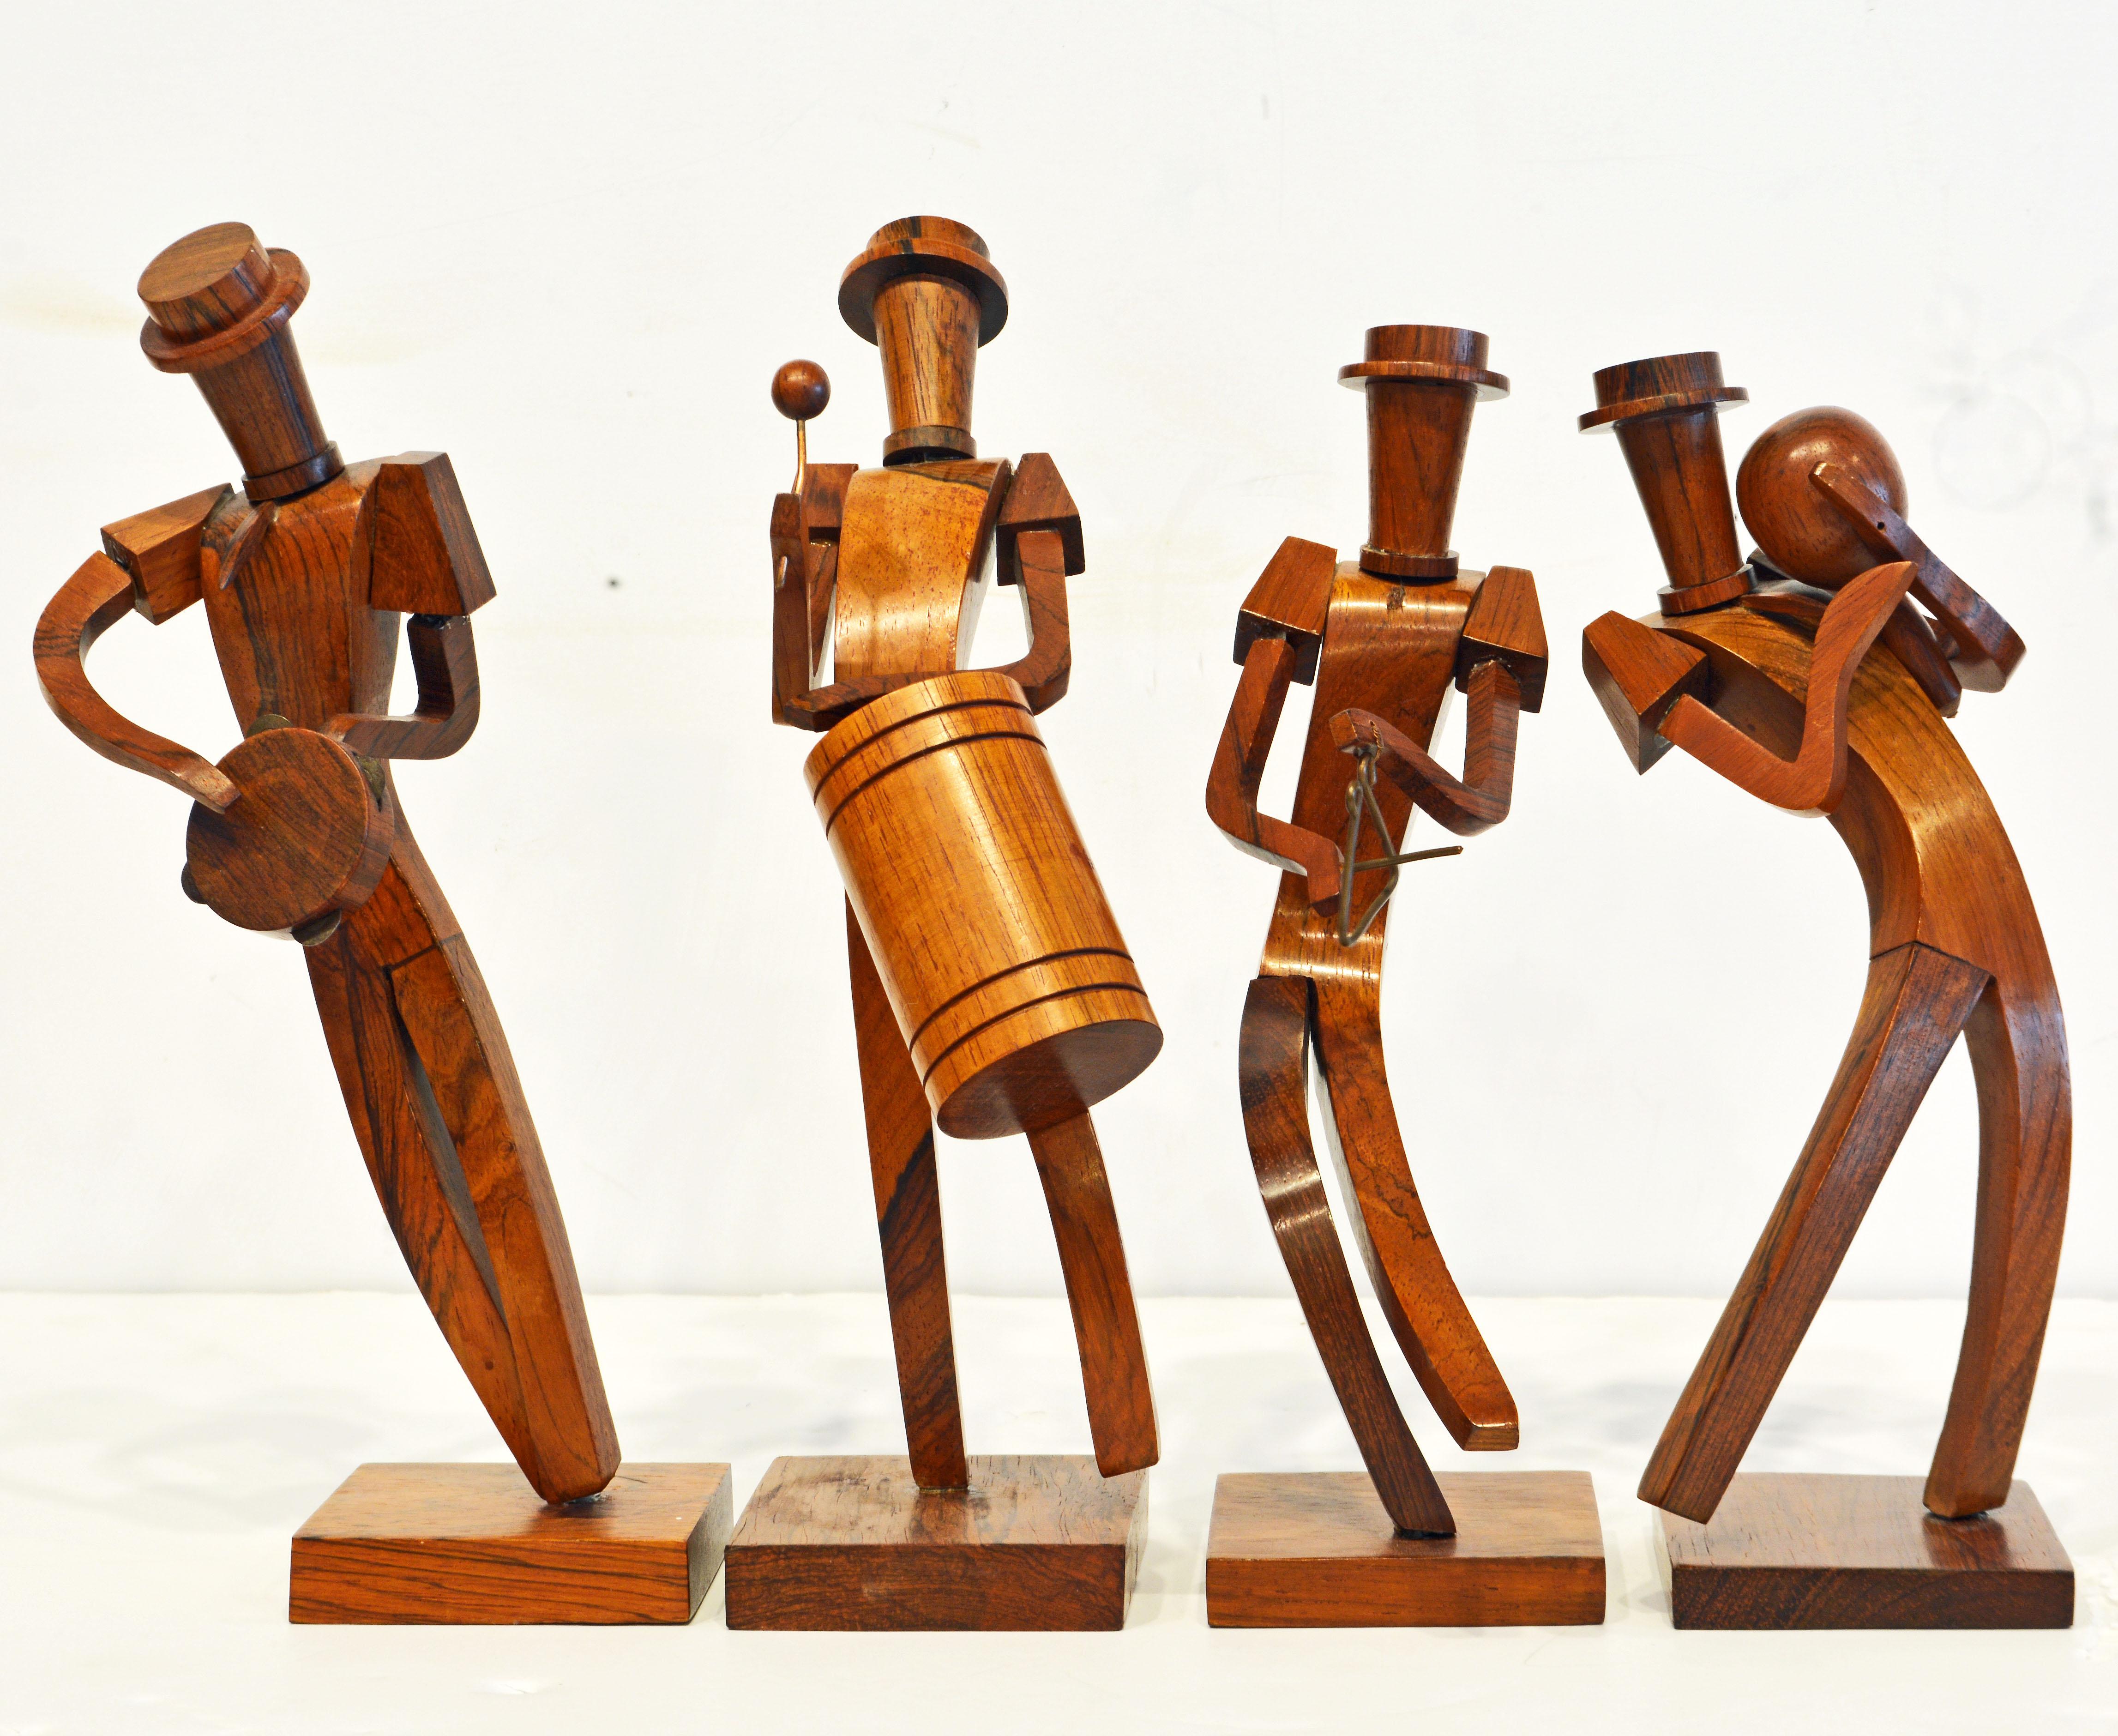 A charming band of four musicians carved in rosewood. Each figure has its own personality expressed in a cubist inspired design.